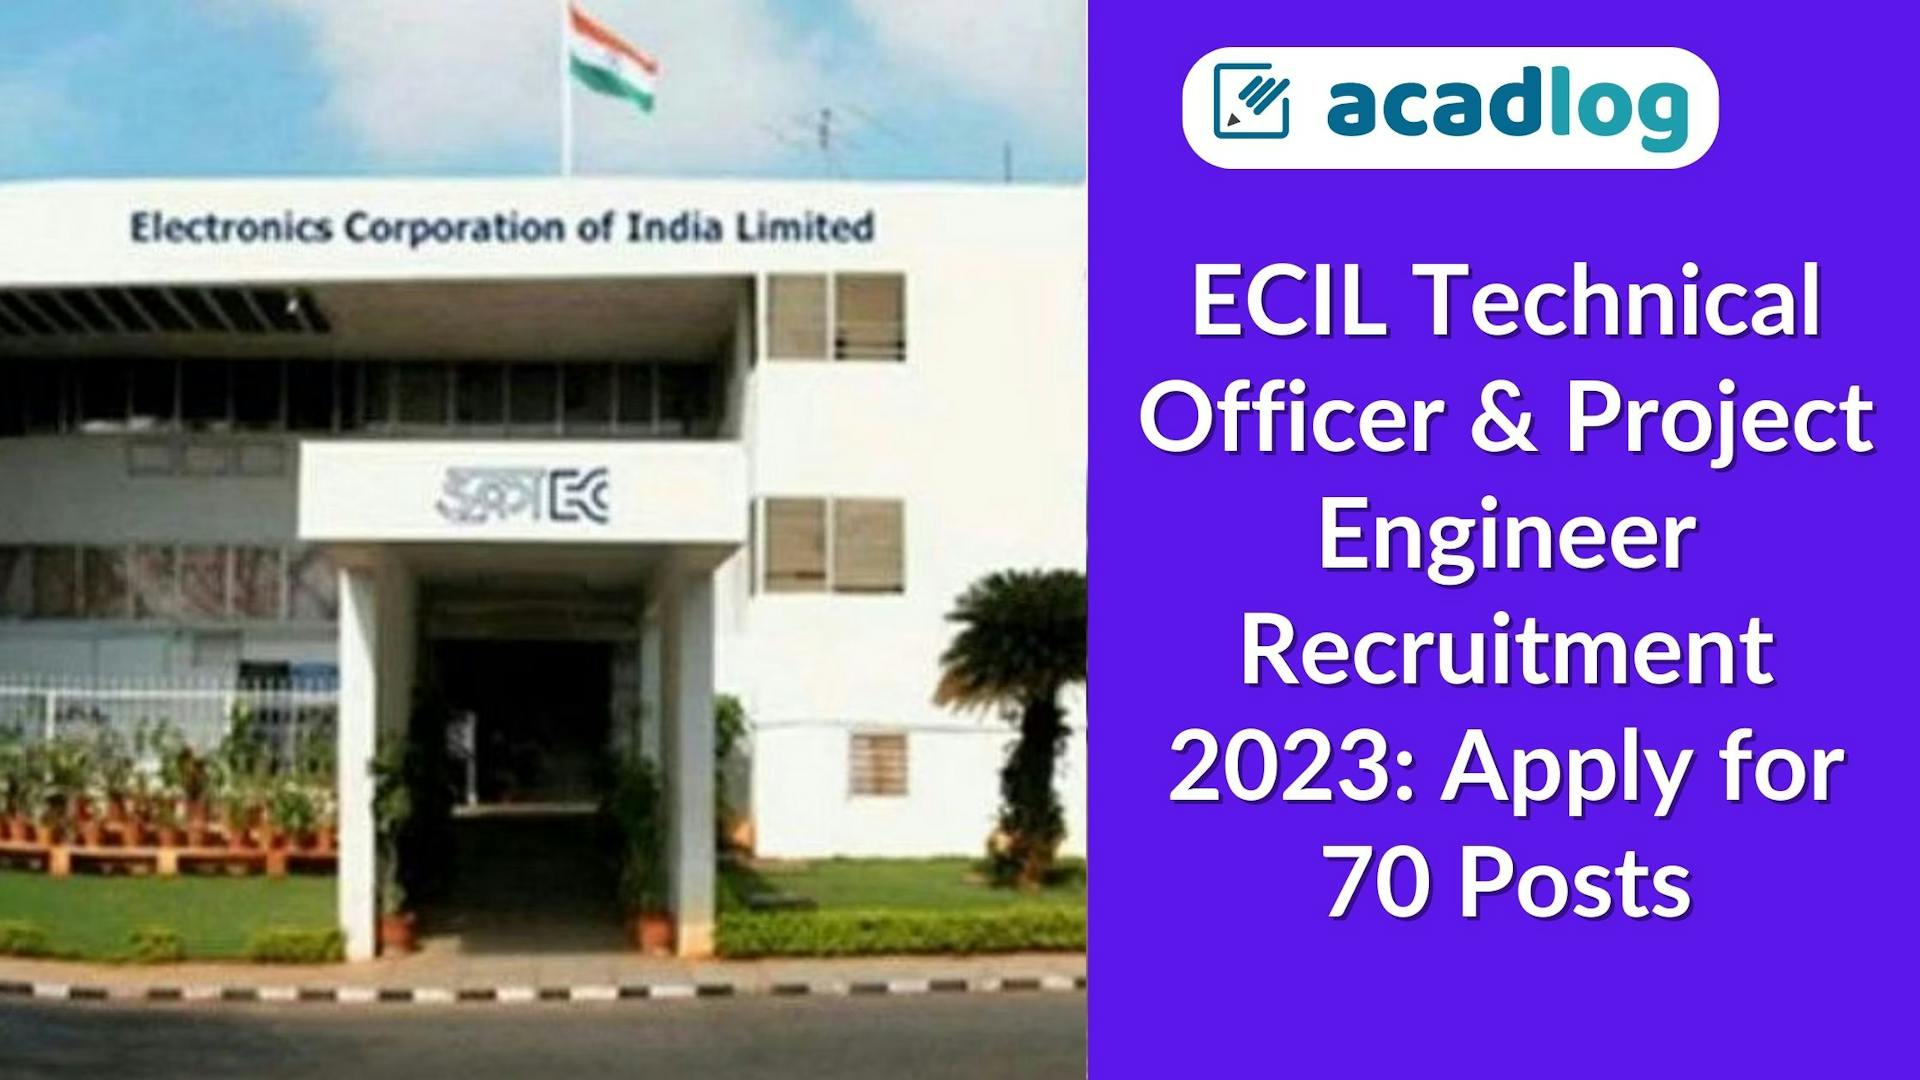 ECIL Technical Officer & Project Engineer Recruitment 2023: Apply for 70 Posts